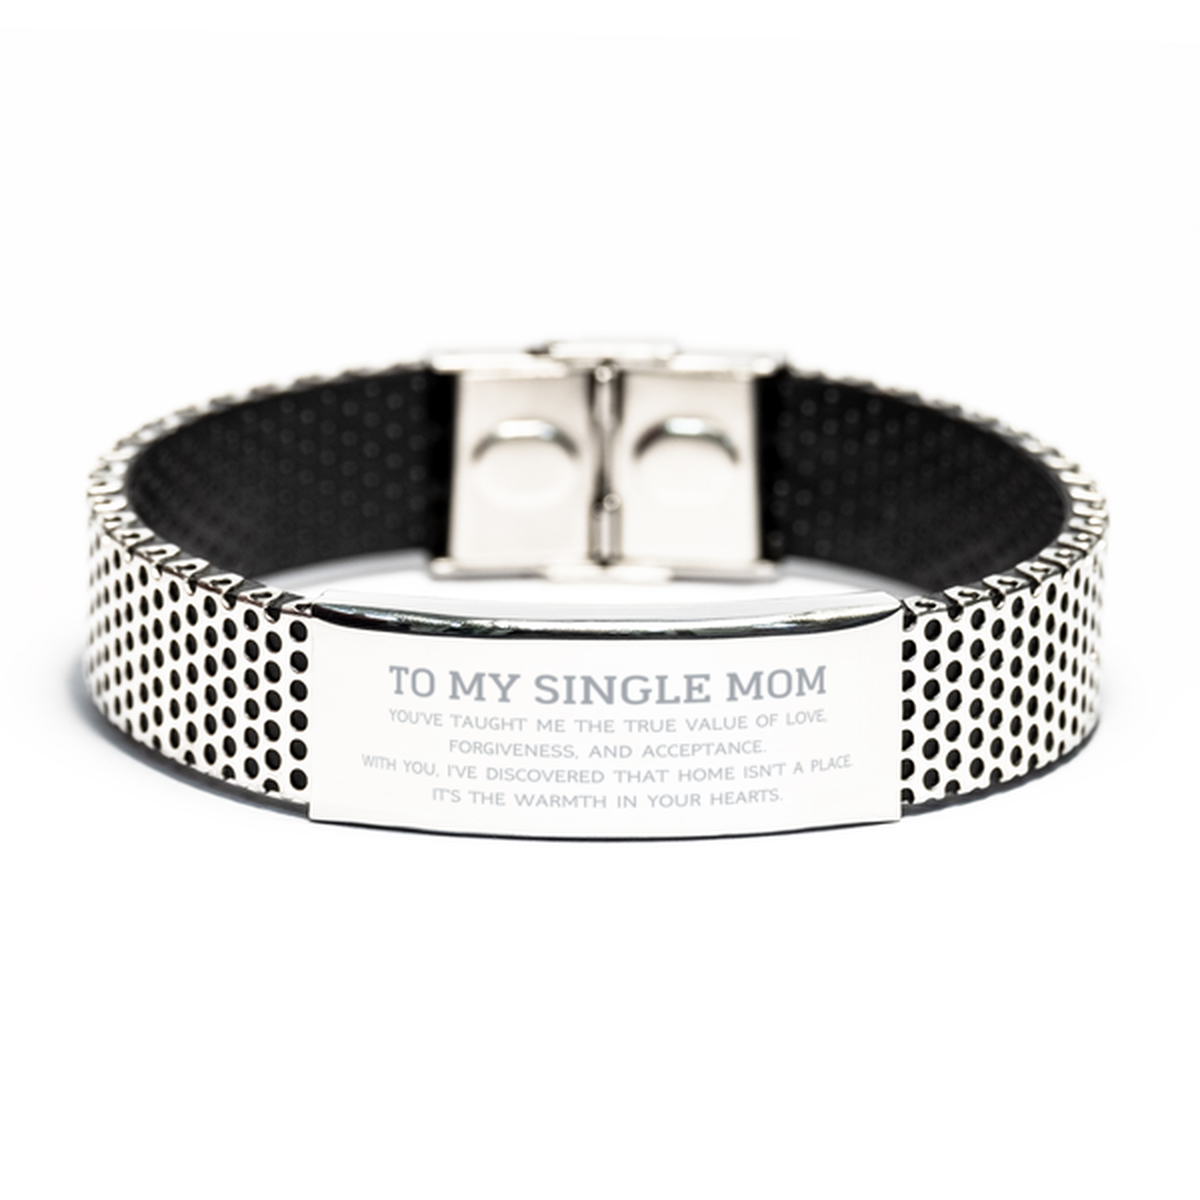 To My Single Mom Gifts, You've taught me the true value of love, Thank You Gifts For Single Mom, Birthday Stainless Steel Bracelet For Single Mom